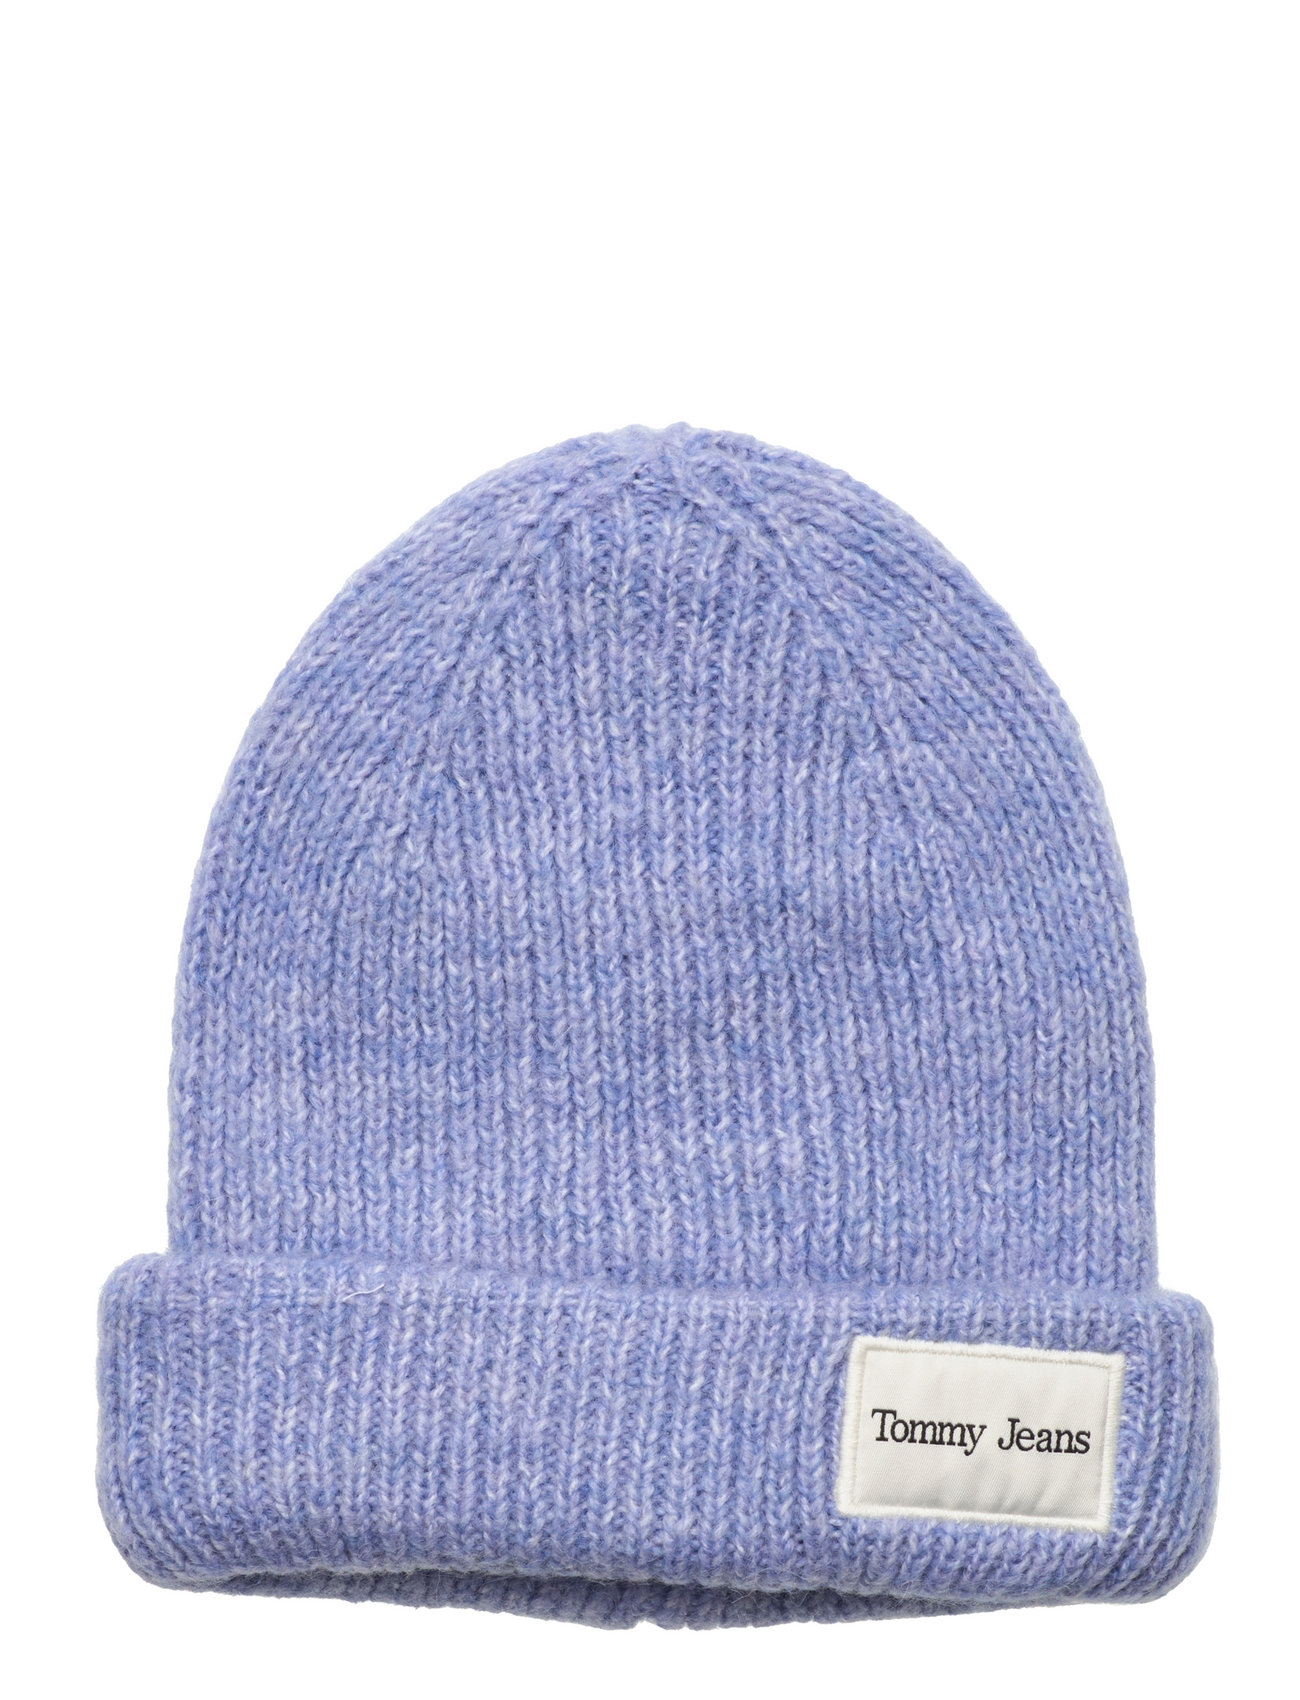 Tommy Hilfiger Elevated Beanie Tjw Sport - Hats